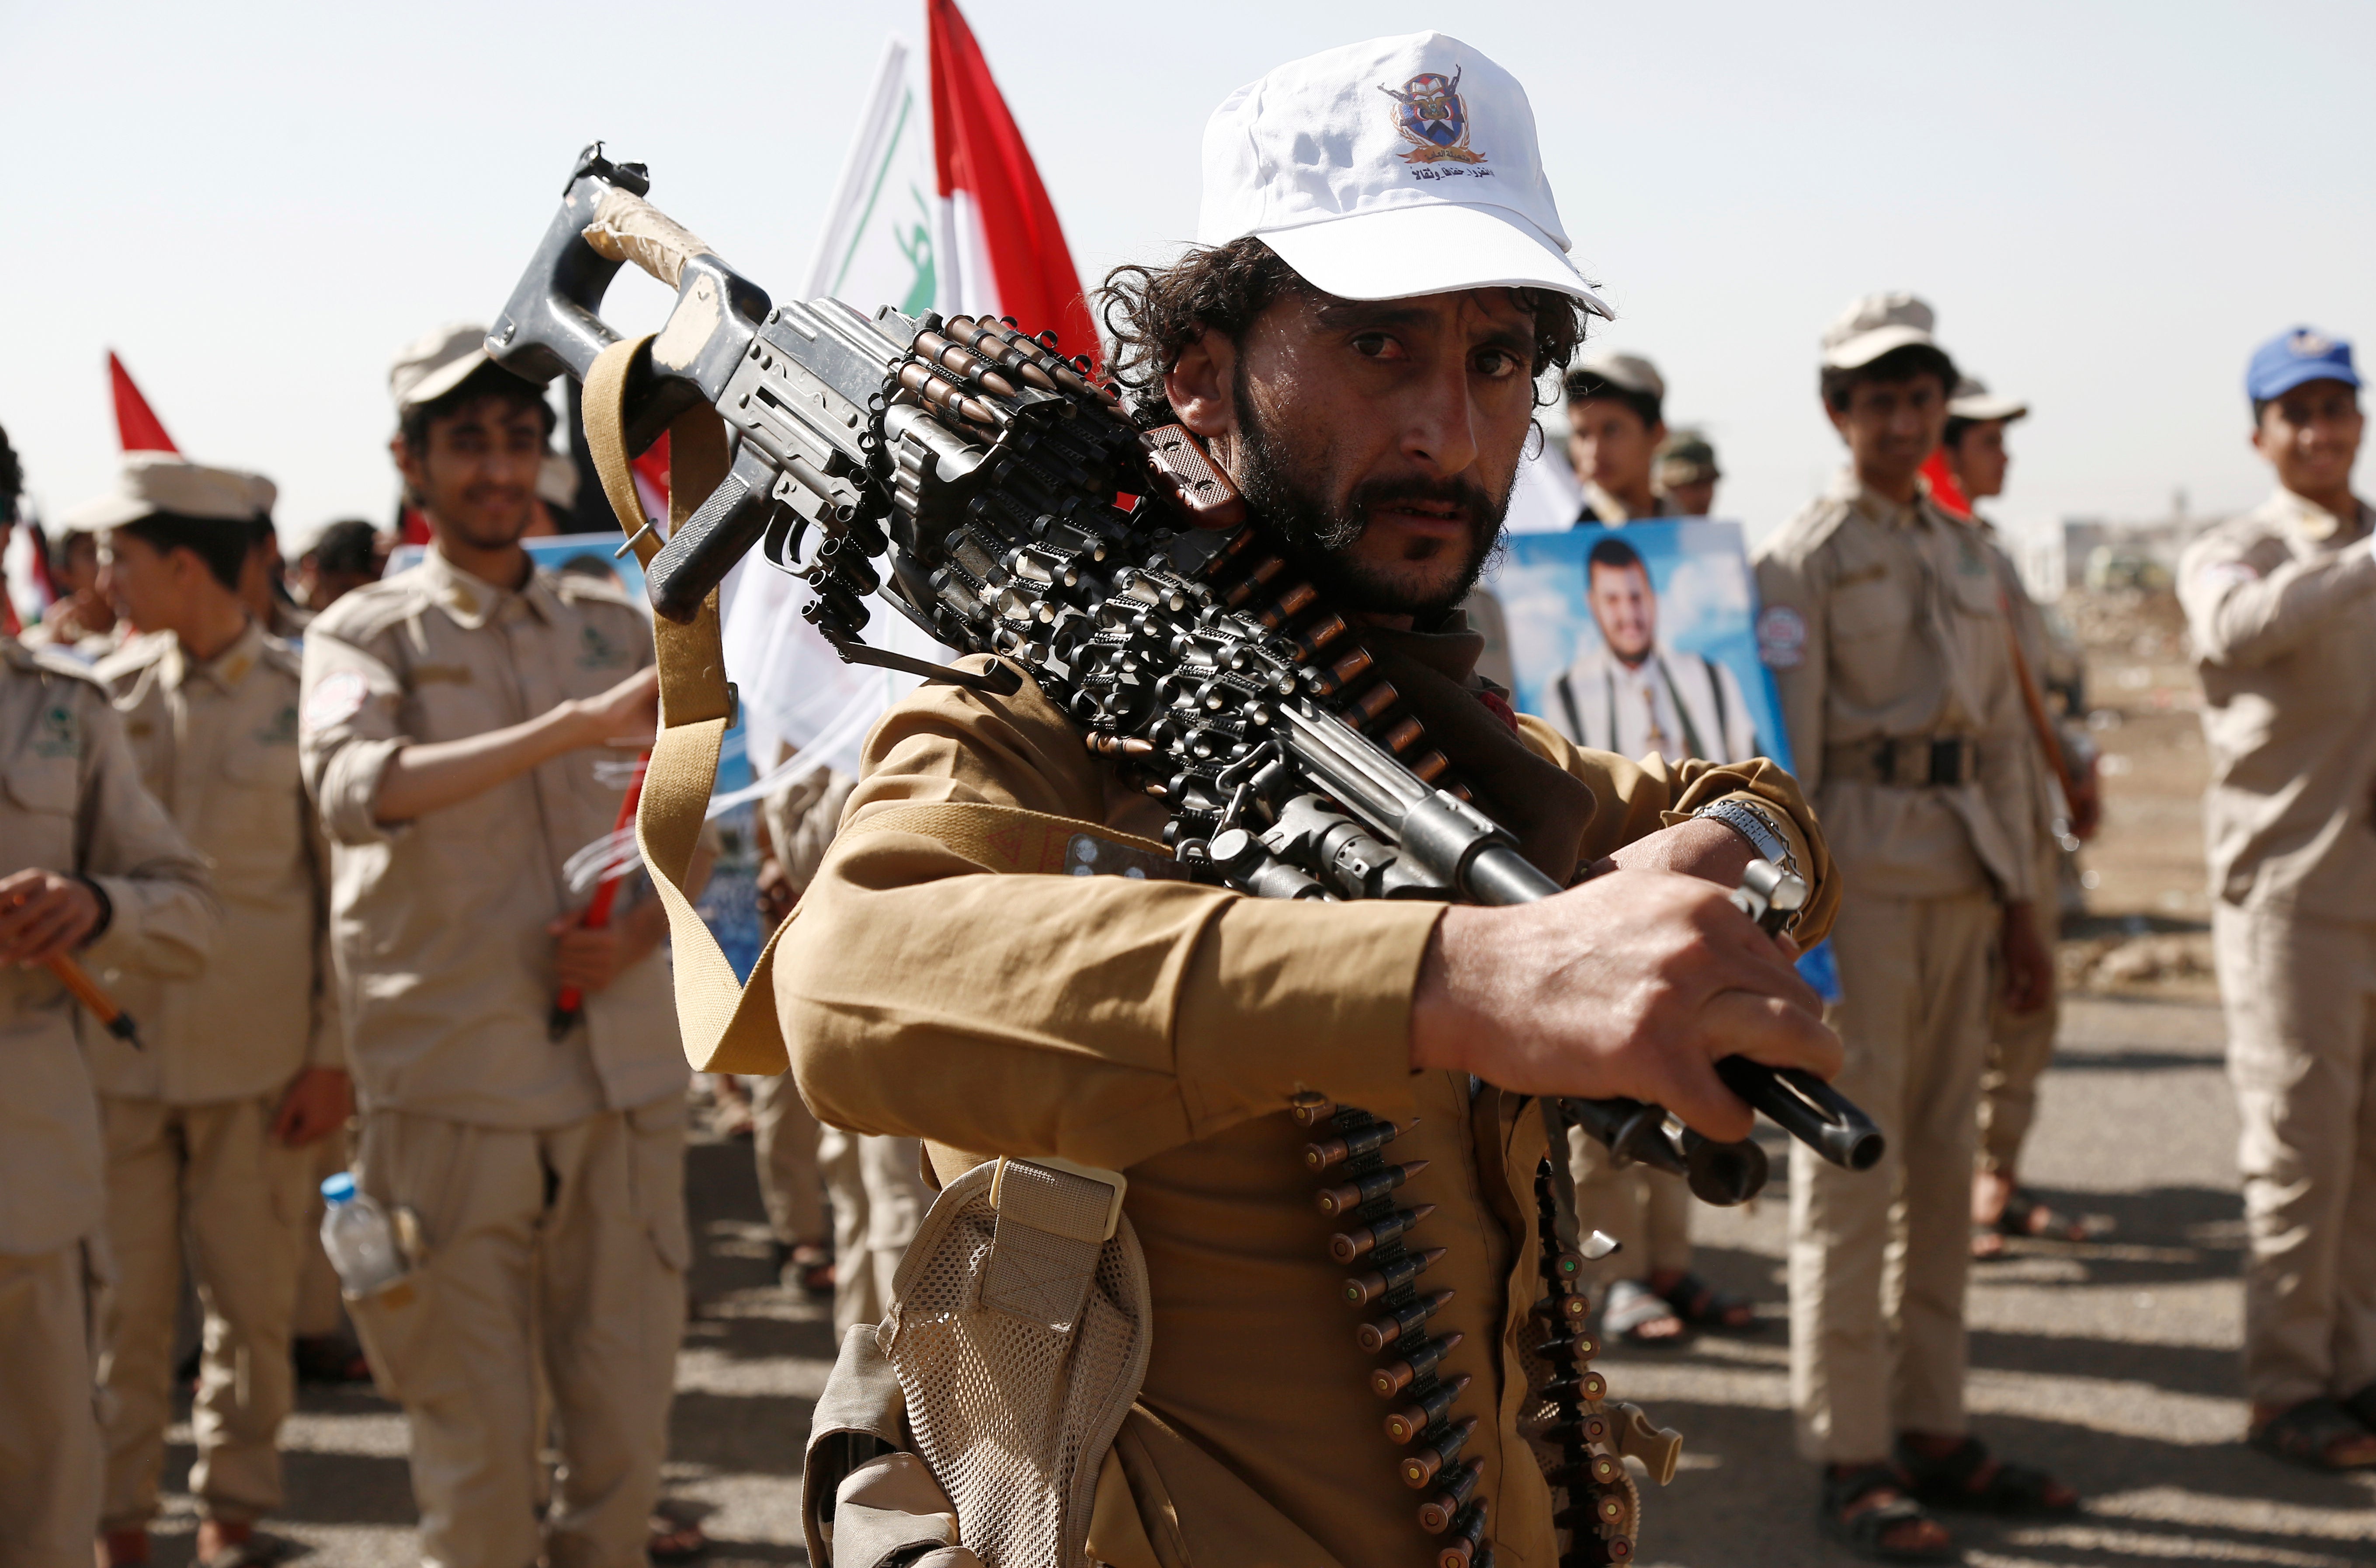 A Houthi fighter holds a machine gun in front of scout team members carrying Yemeni and Palestinian flags